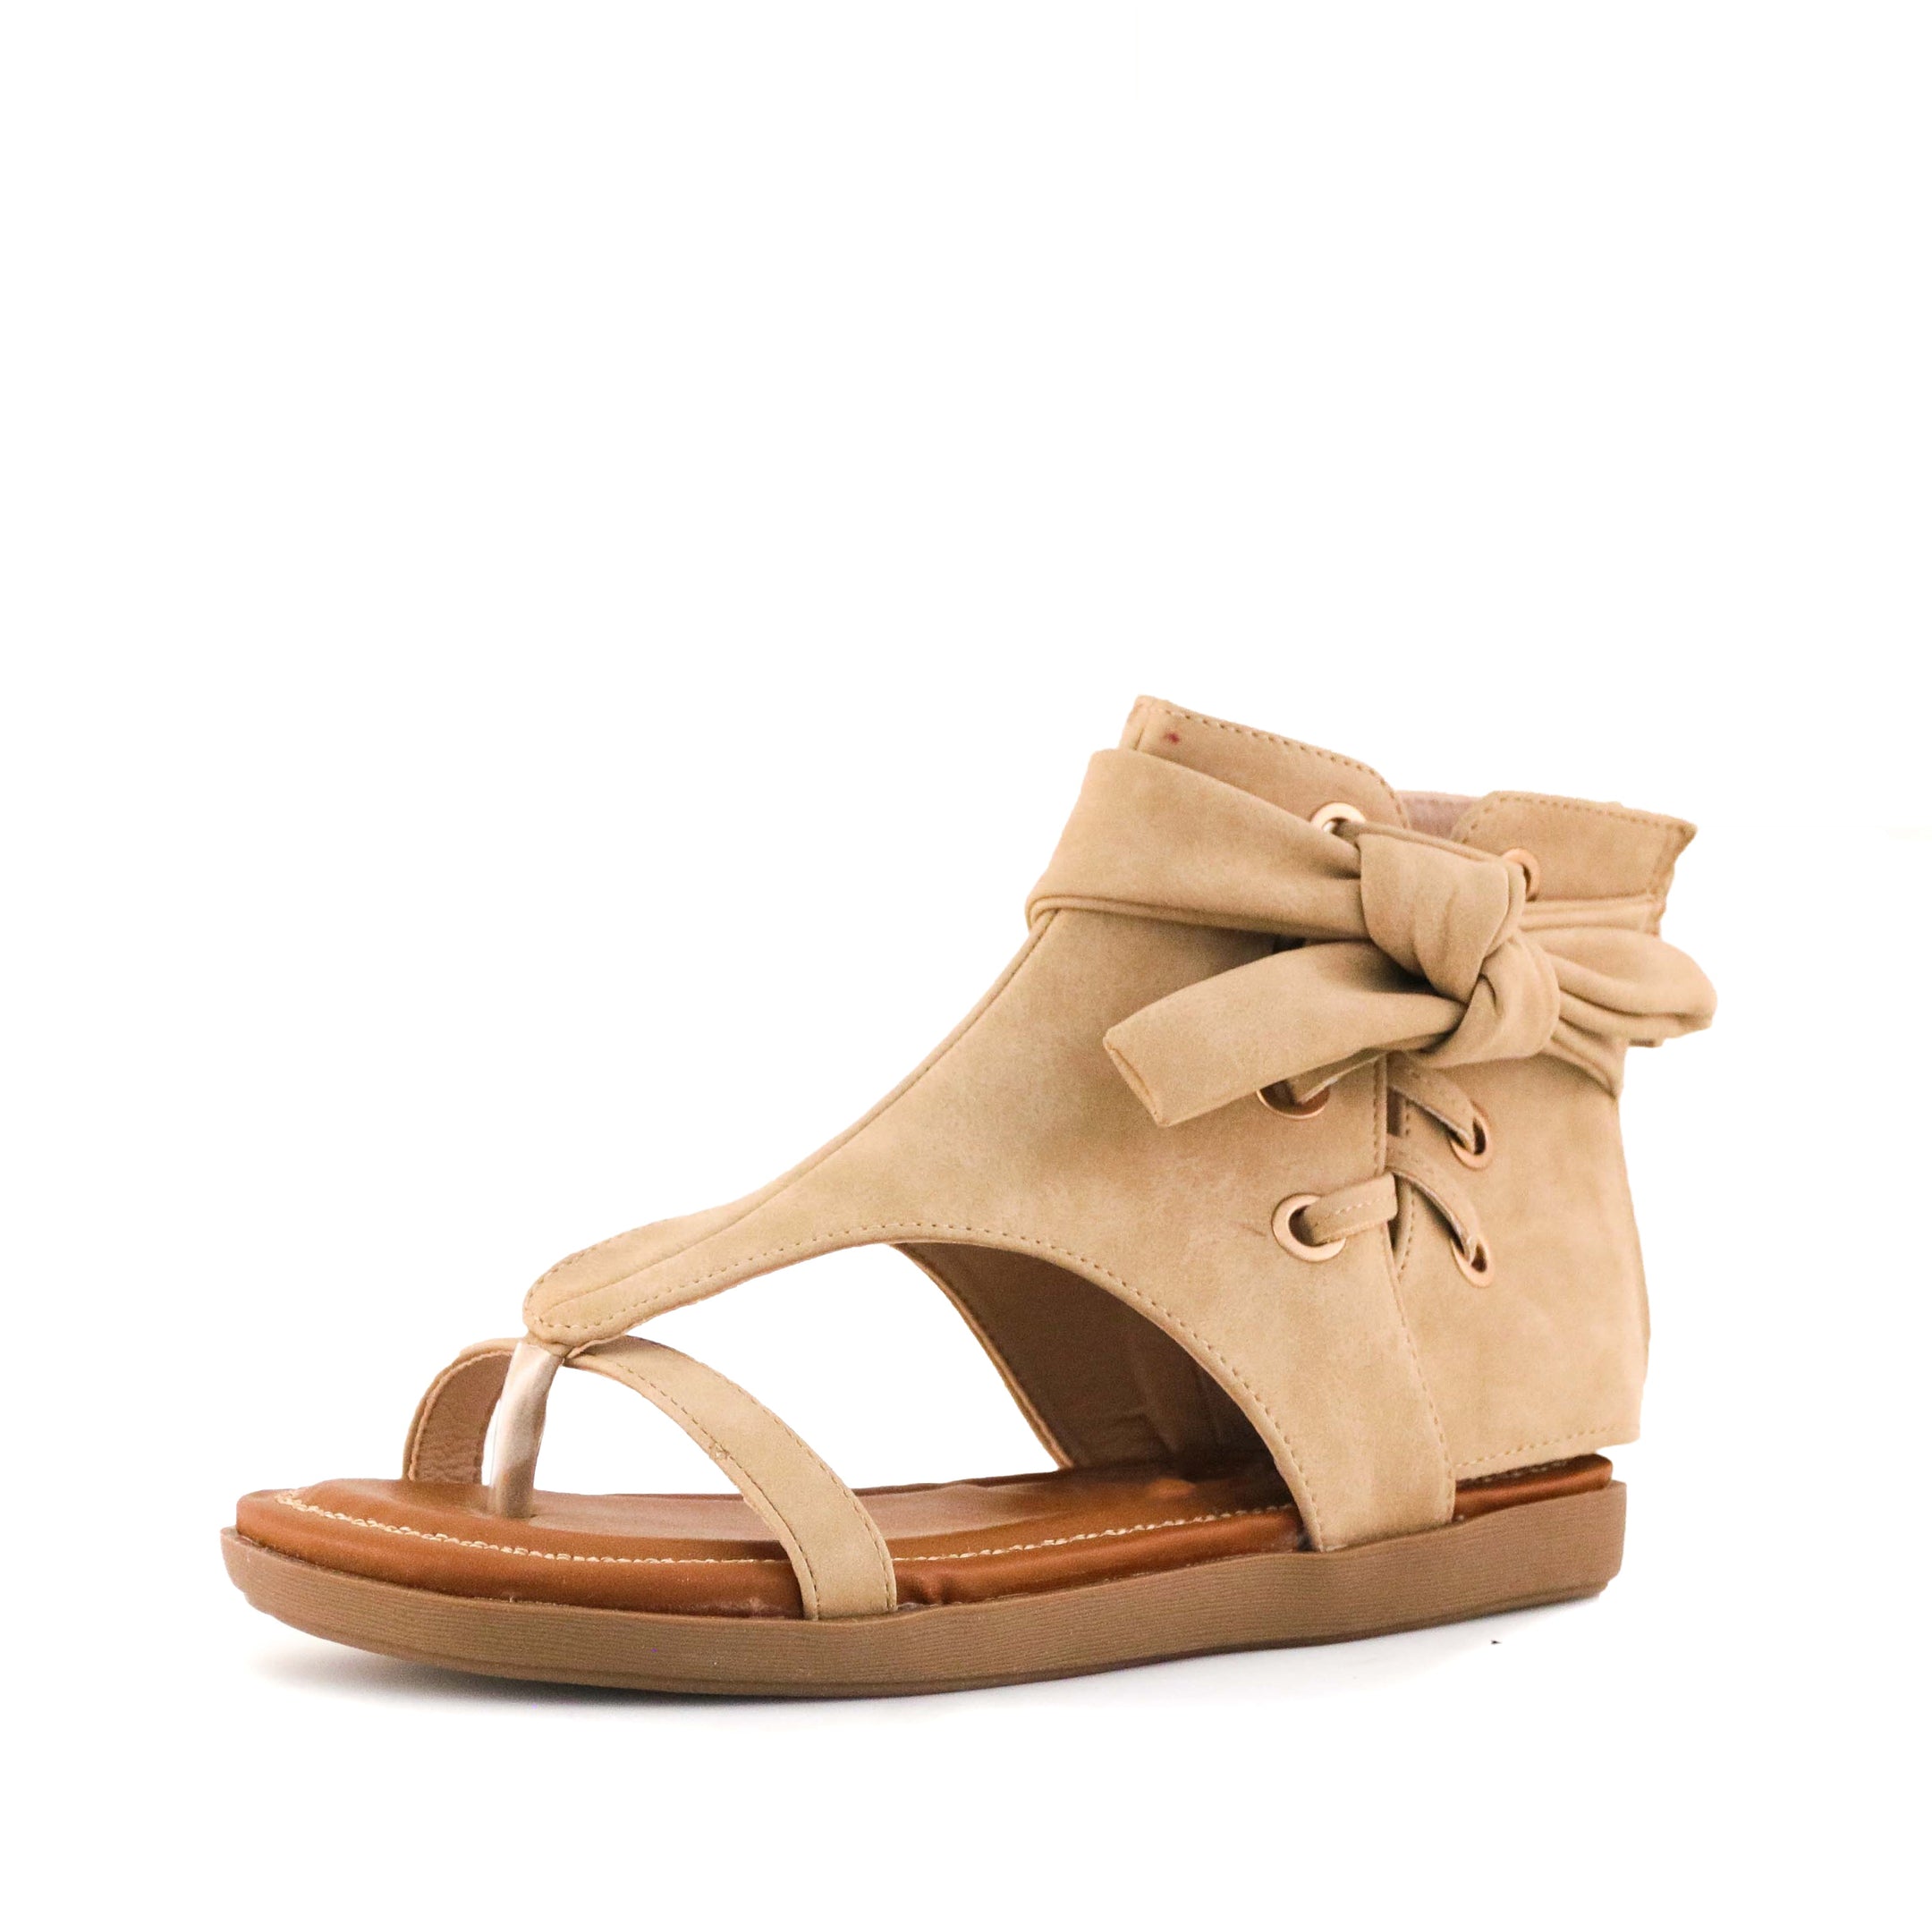 Buy Women's Chi Lace Detail Gladiator Sandal Natural by Nest Shoes